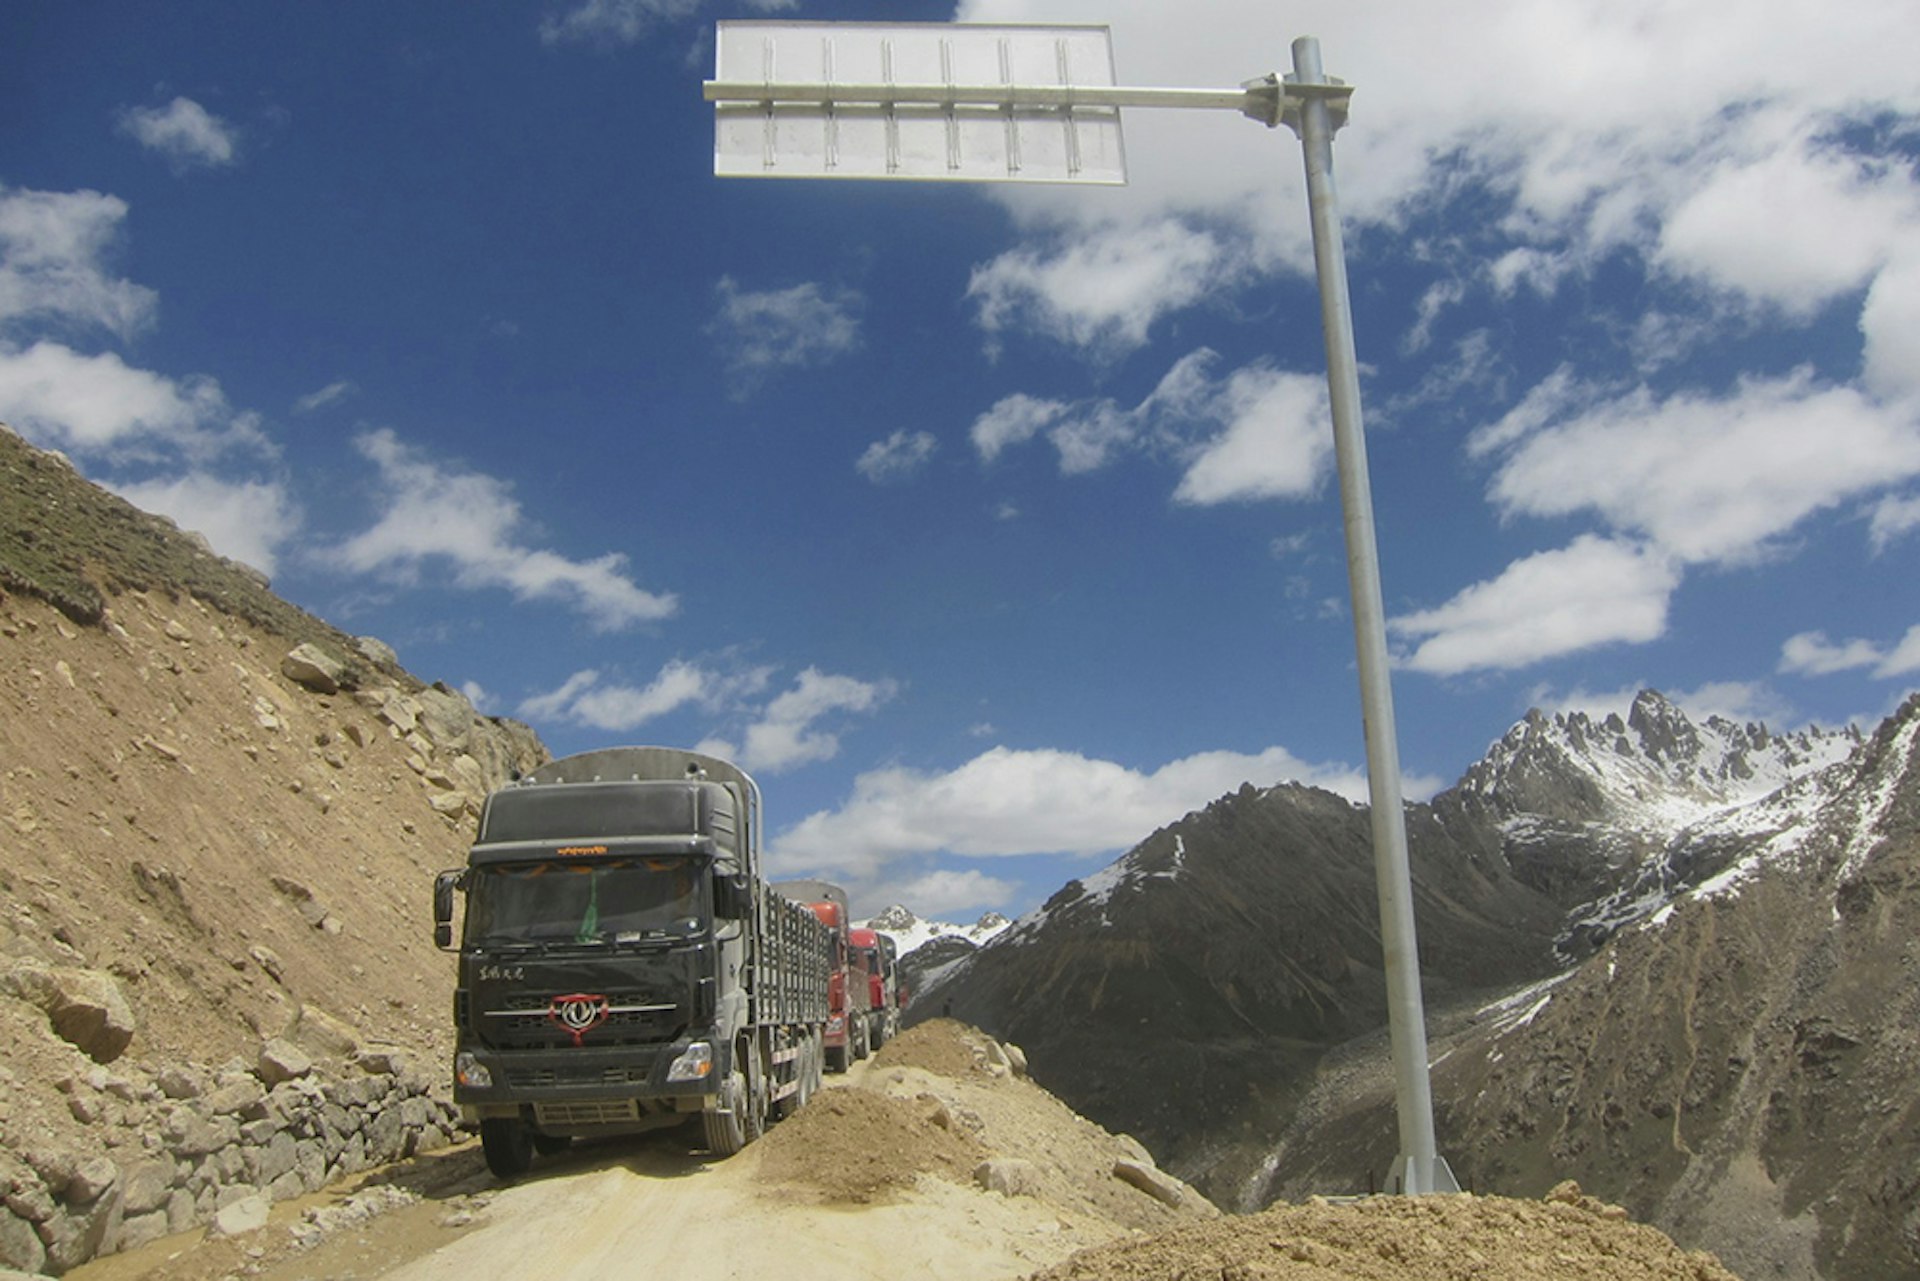 The Chola mountain pass rises up 5050m and is officially a two-lane road. Image by Tienlon Ho / Lonely Planet